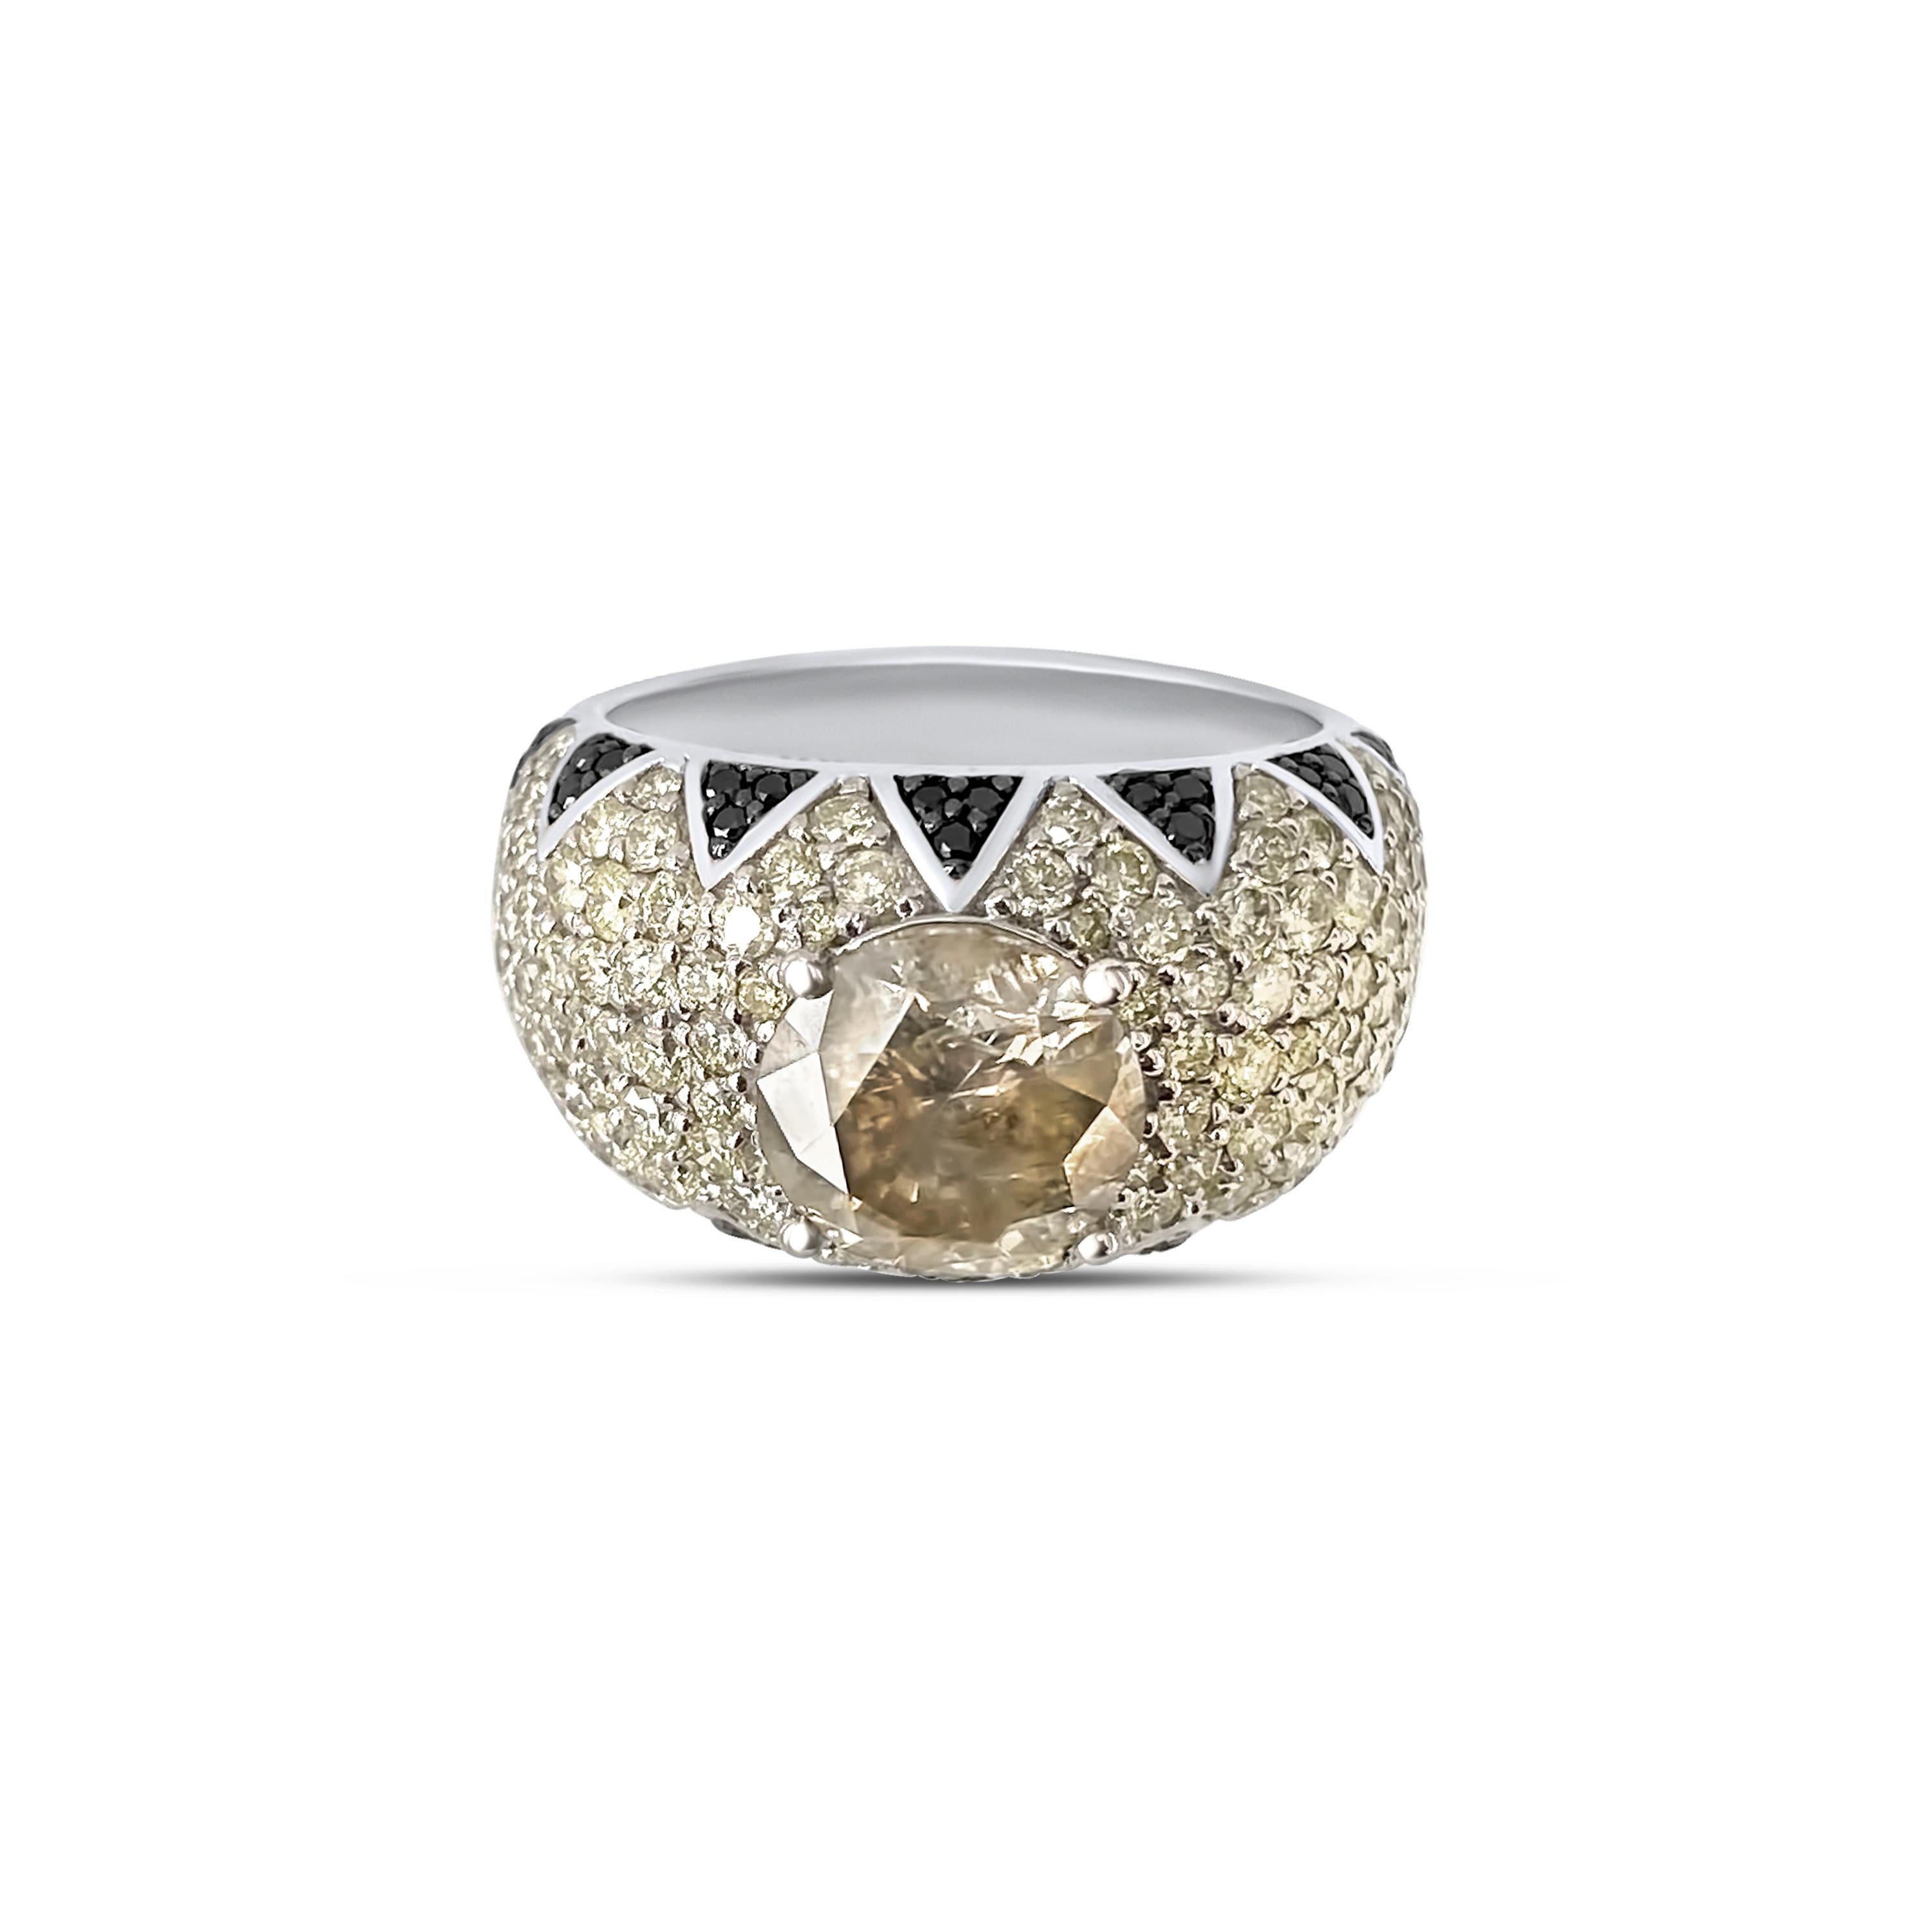 Women's or Men's Lotus Bombe ring with 2.53 ct champagne diamond solitaire & black diamond petals For Sale